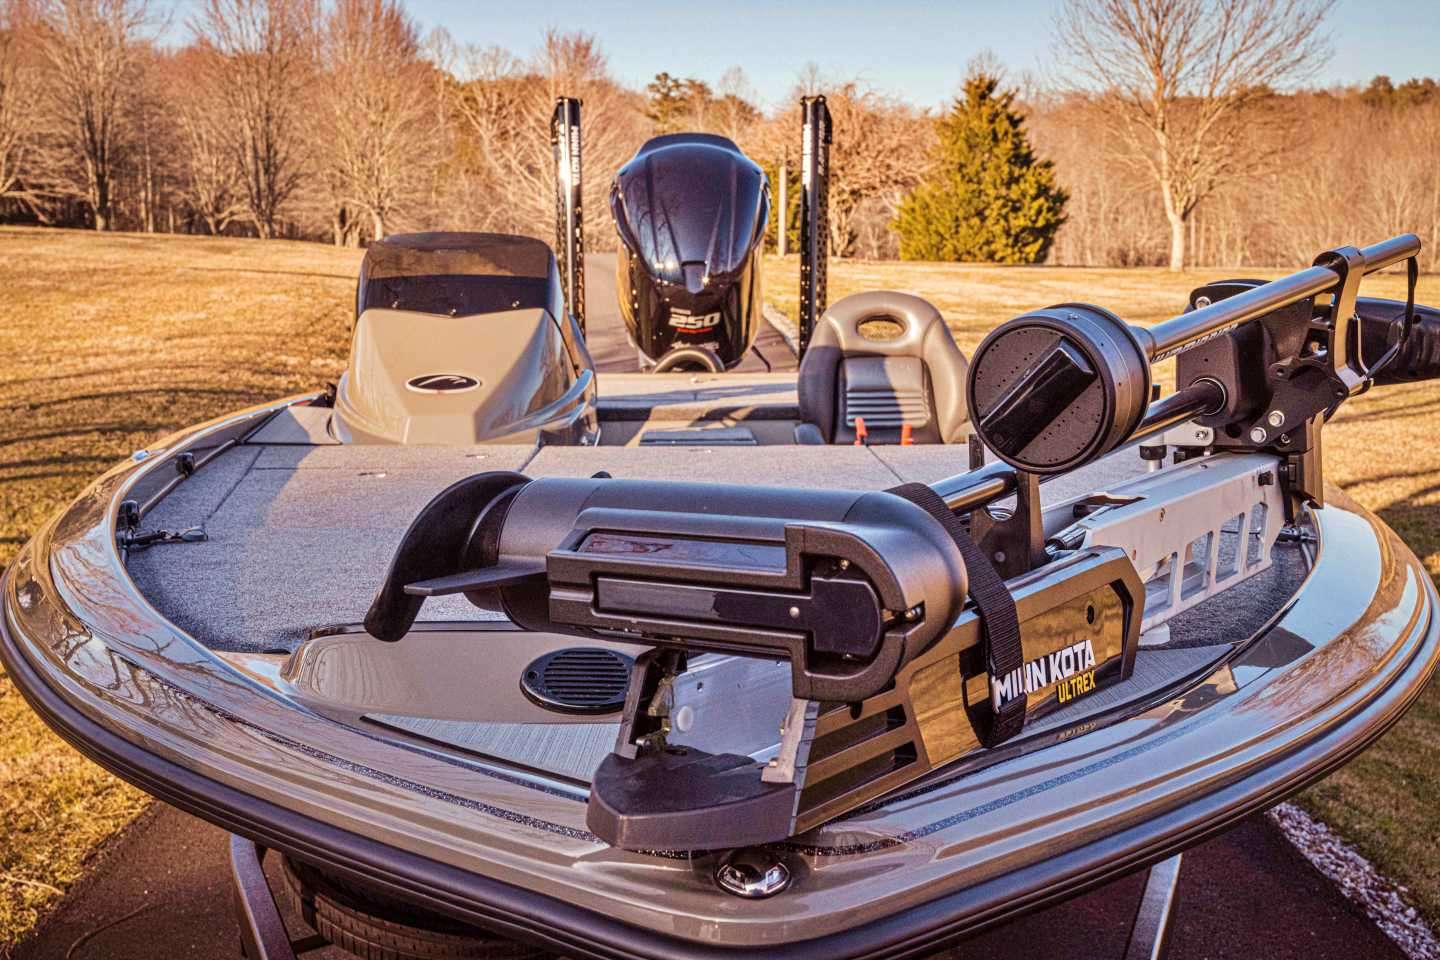 Jocumsen will compete from a 2021 Falcon Boats F20 Predator, spanning 20 feet, 1 inch with a 99-inch beam and 50-gallon fuel capacity. After taking delivery of the boat, he took it to Anderson Marine in Nashville for initial rigging of the Yamaha 250 V MAX SHO outboard, the Minn Kota Ultrex, Minn Kota Raptors and some other necessities. 
